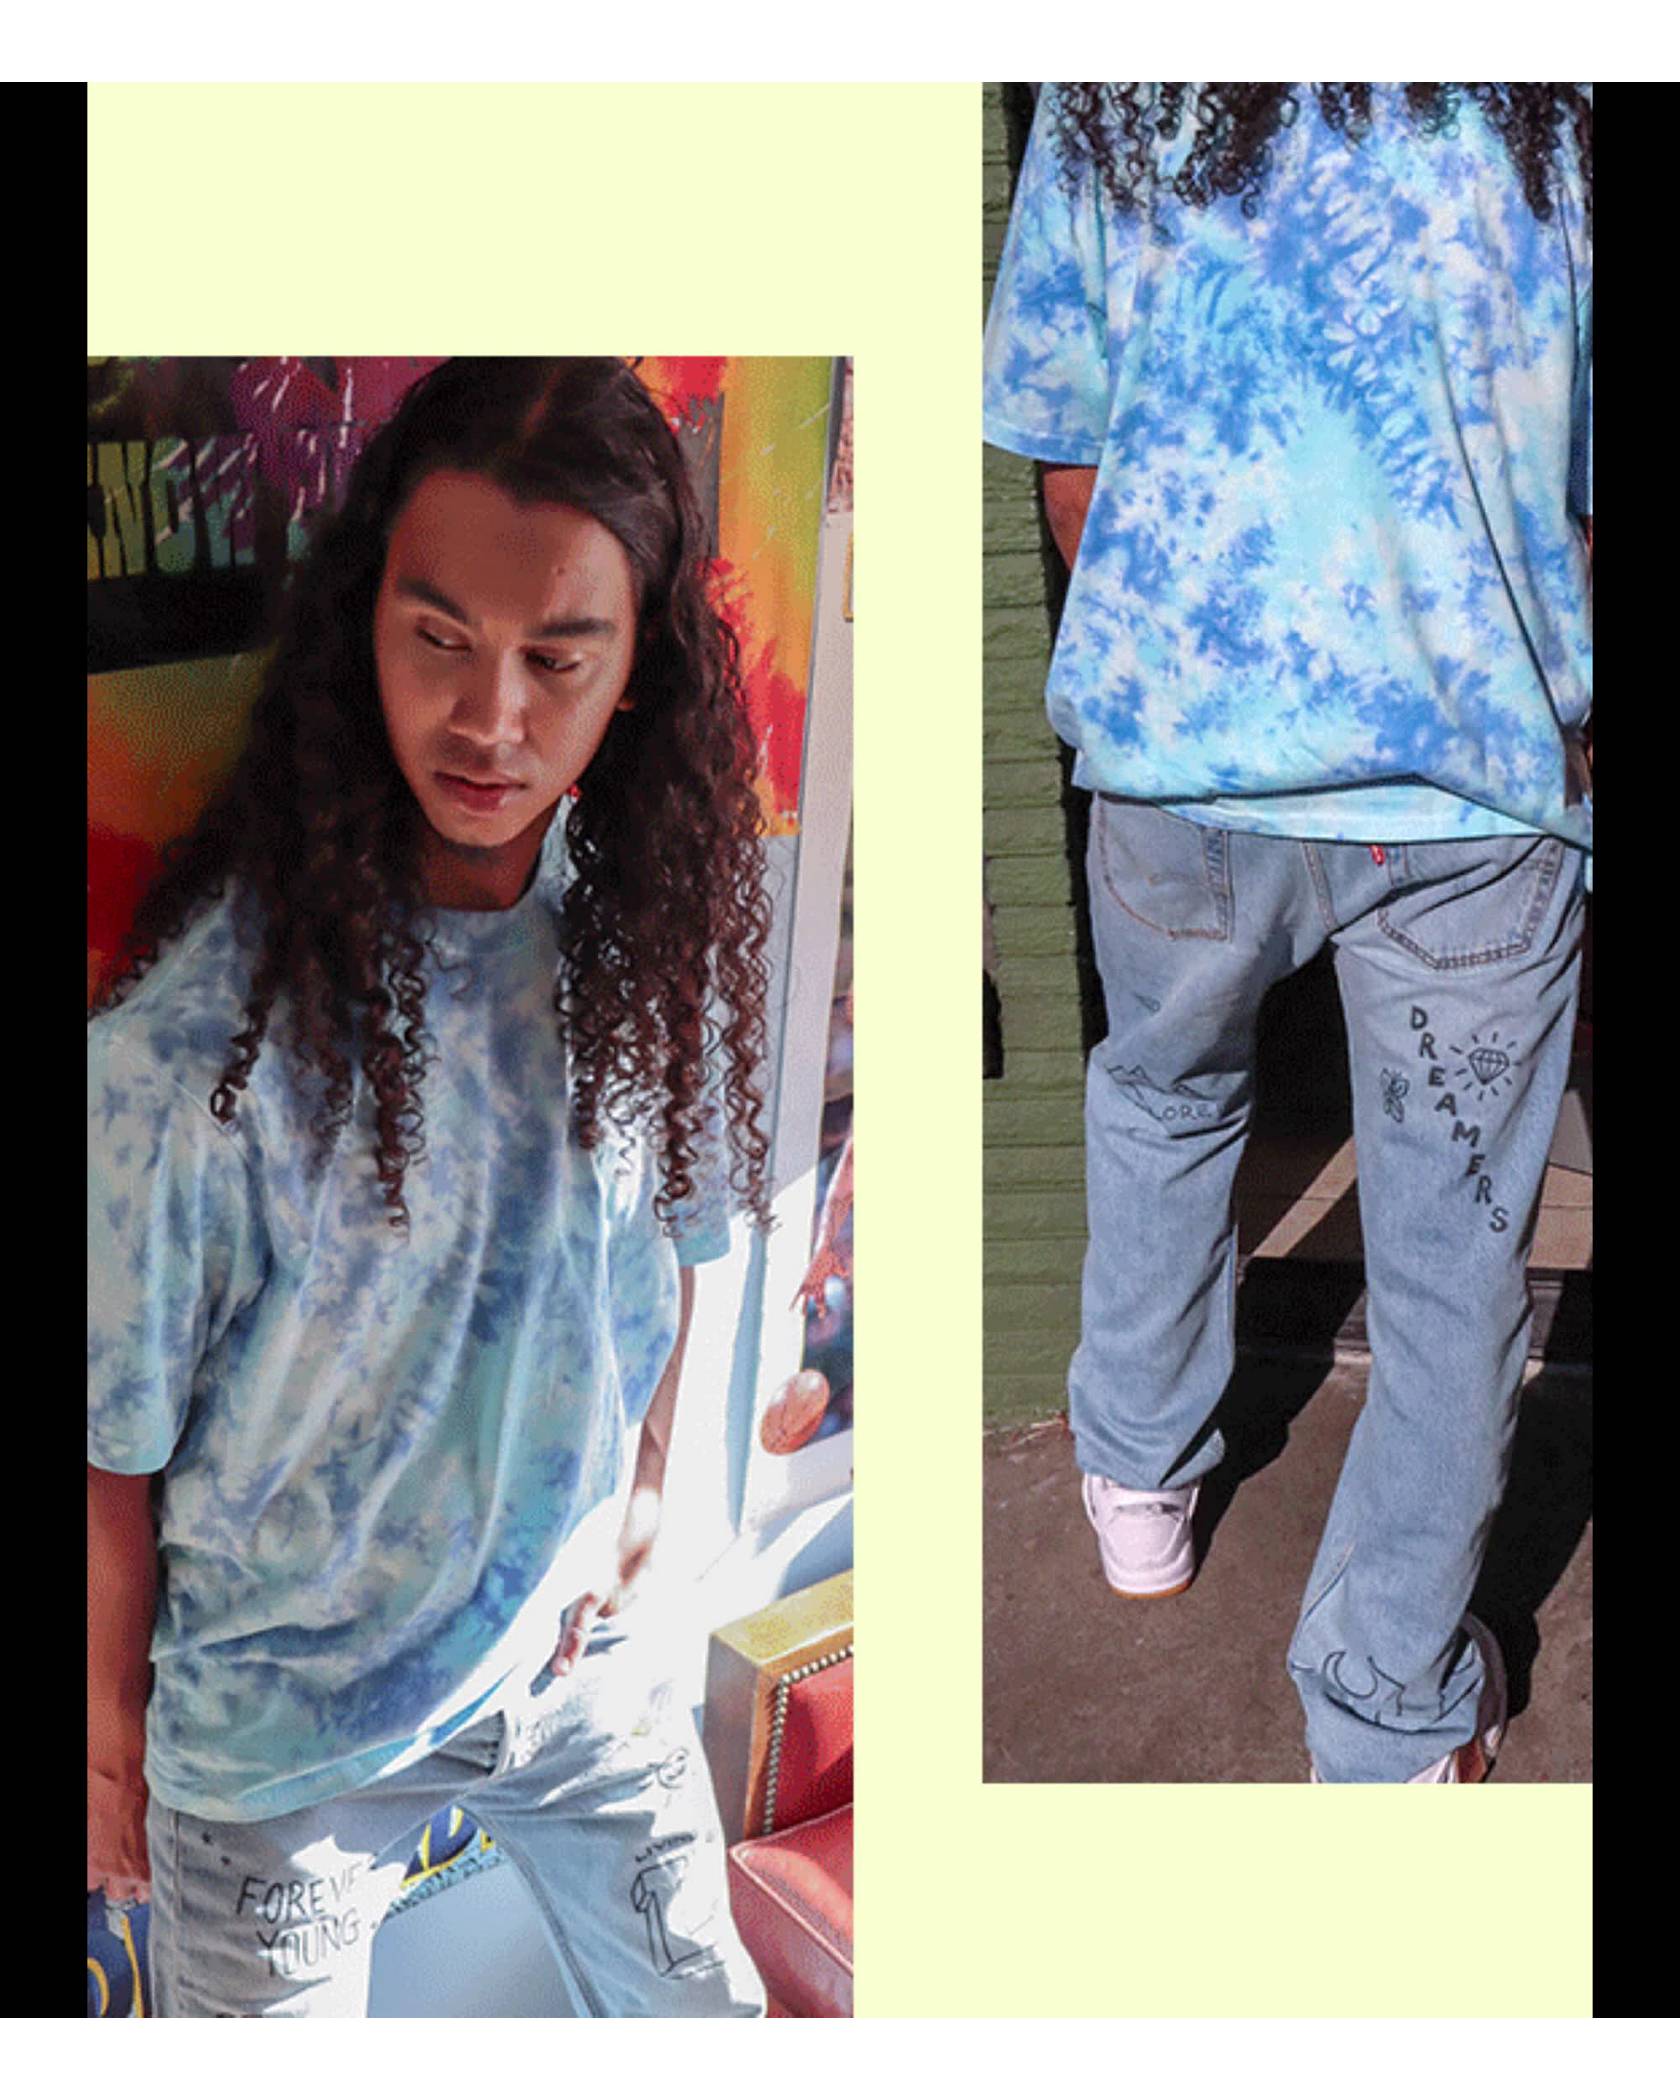 A gif of two images both featuring Skip Jones. The right image is a shot of Skip from behind wearing a blue tye dye shirt and jeans and the left is a photo of Skip's face.